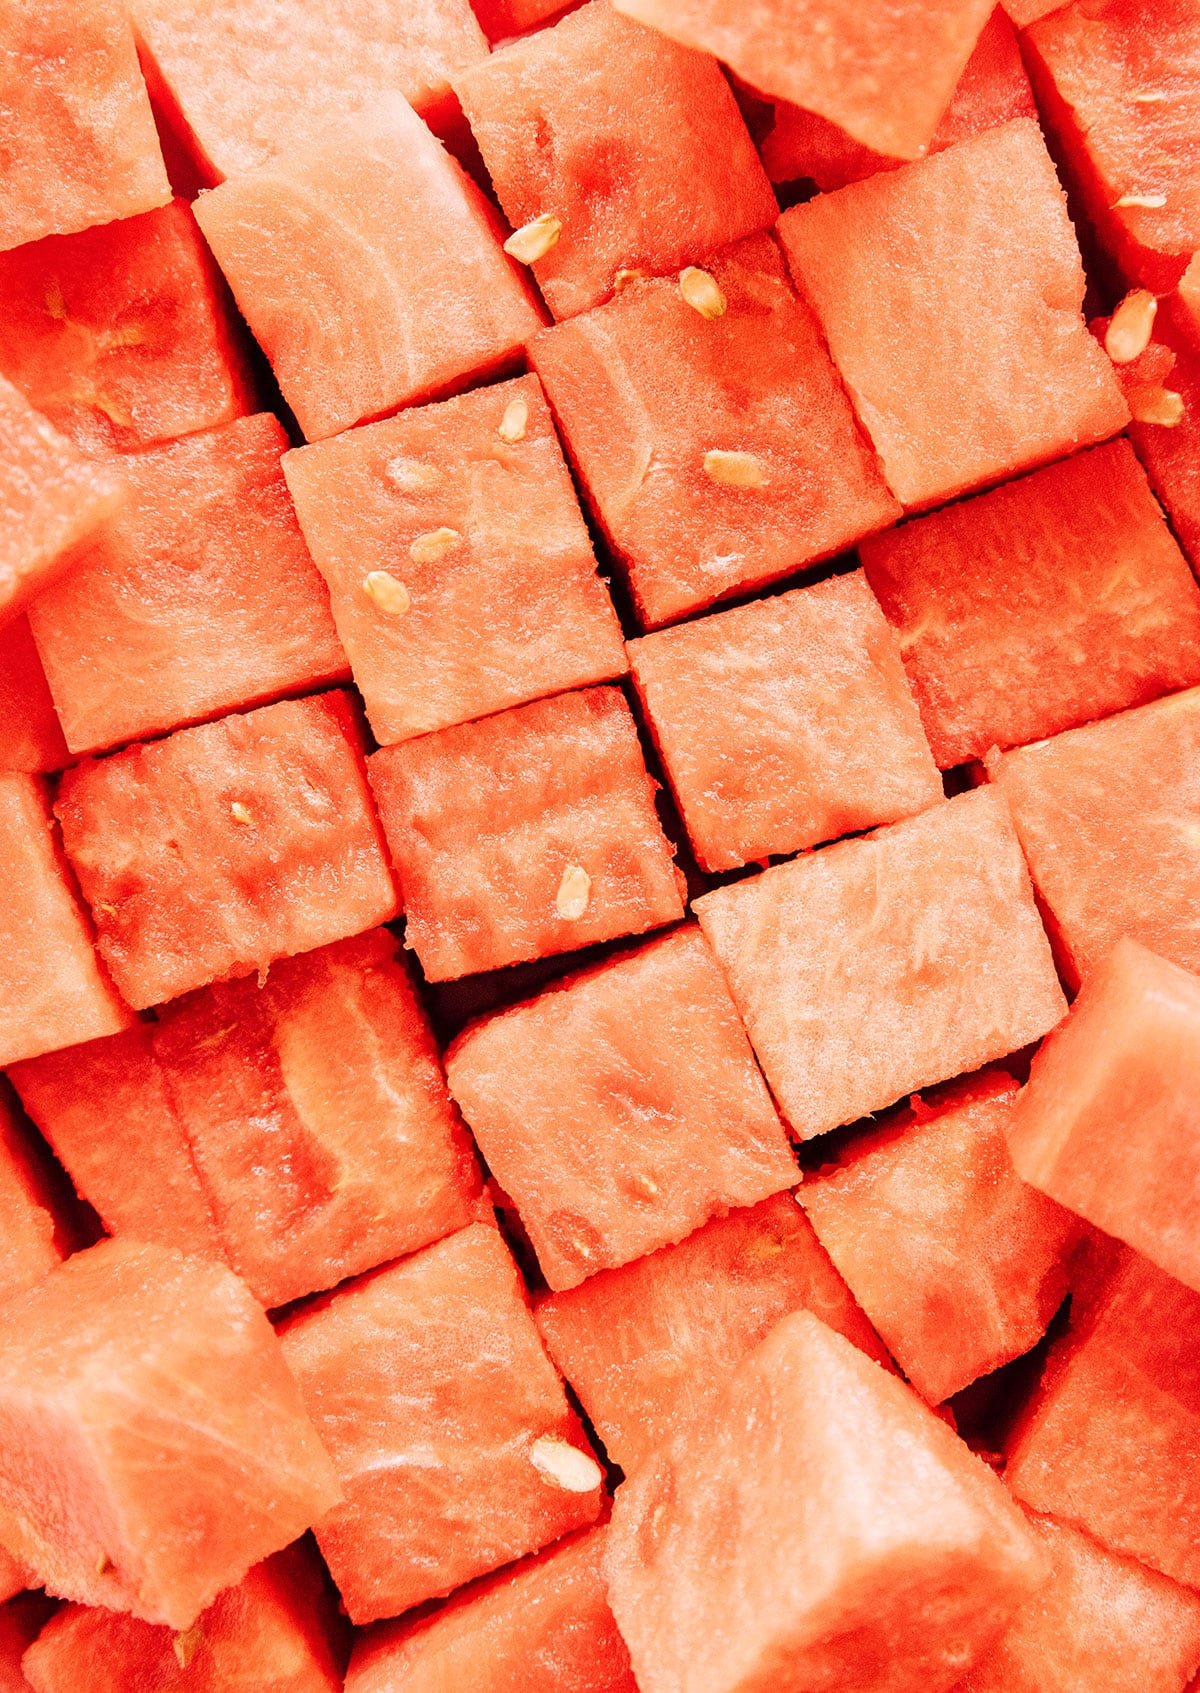 Watermelon cubes close up packed next to eachother.